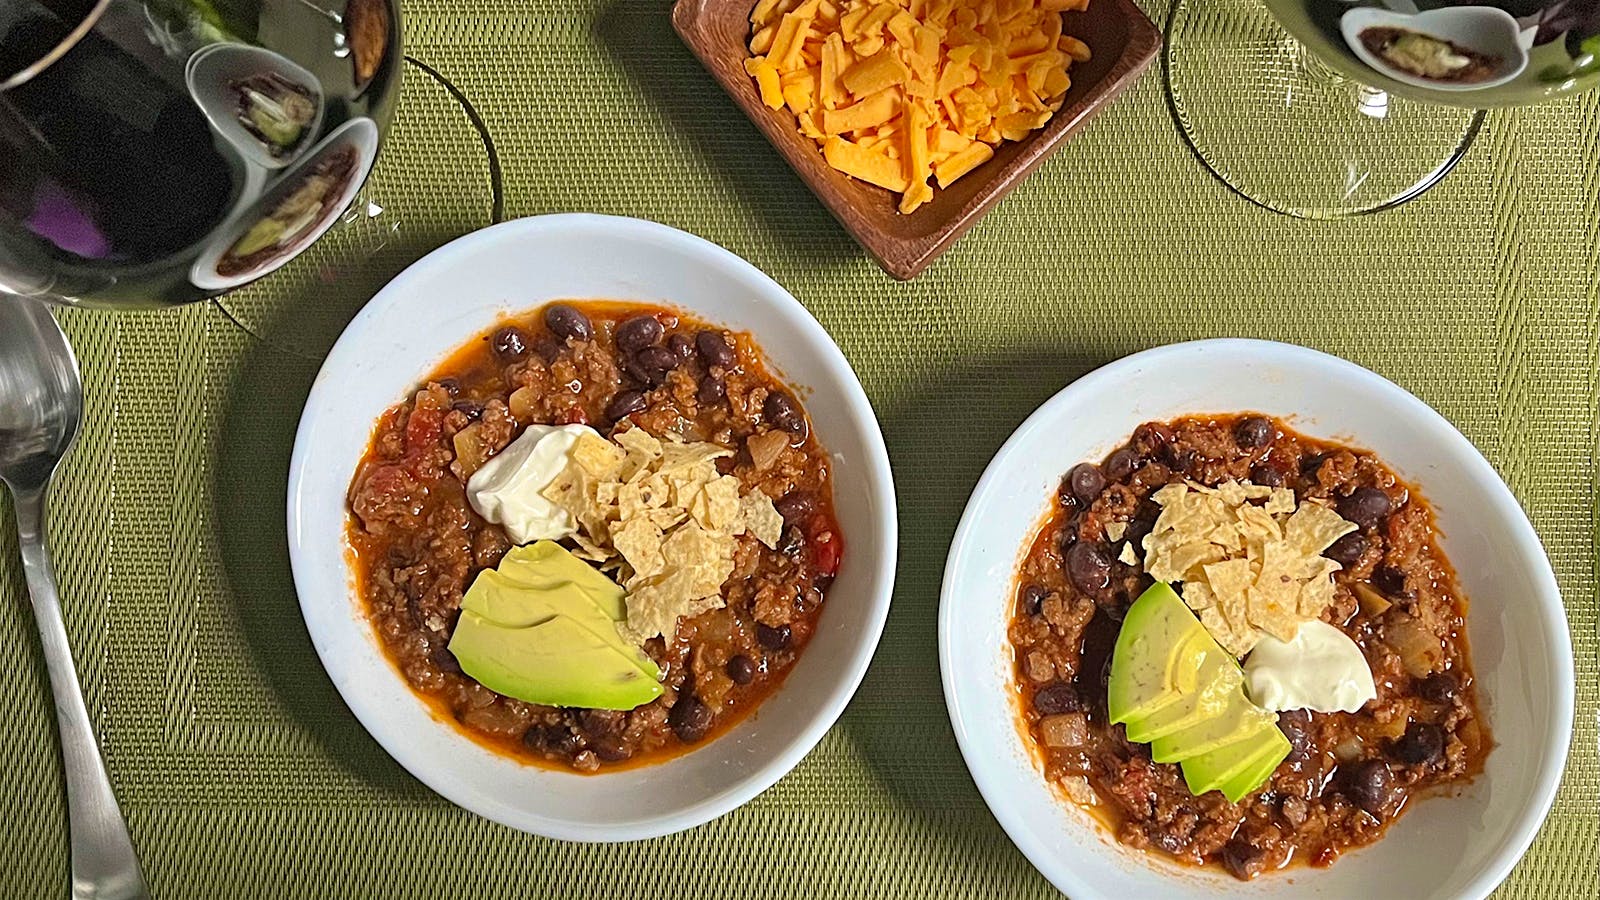 8 & $20: Weeknight Chili with a Rioja Blend